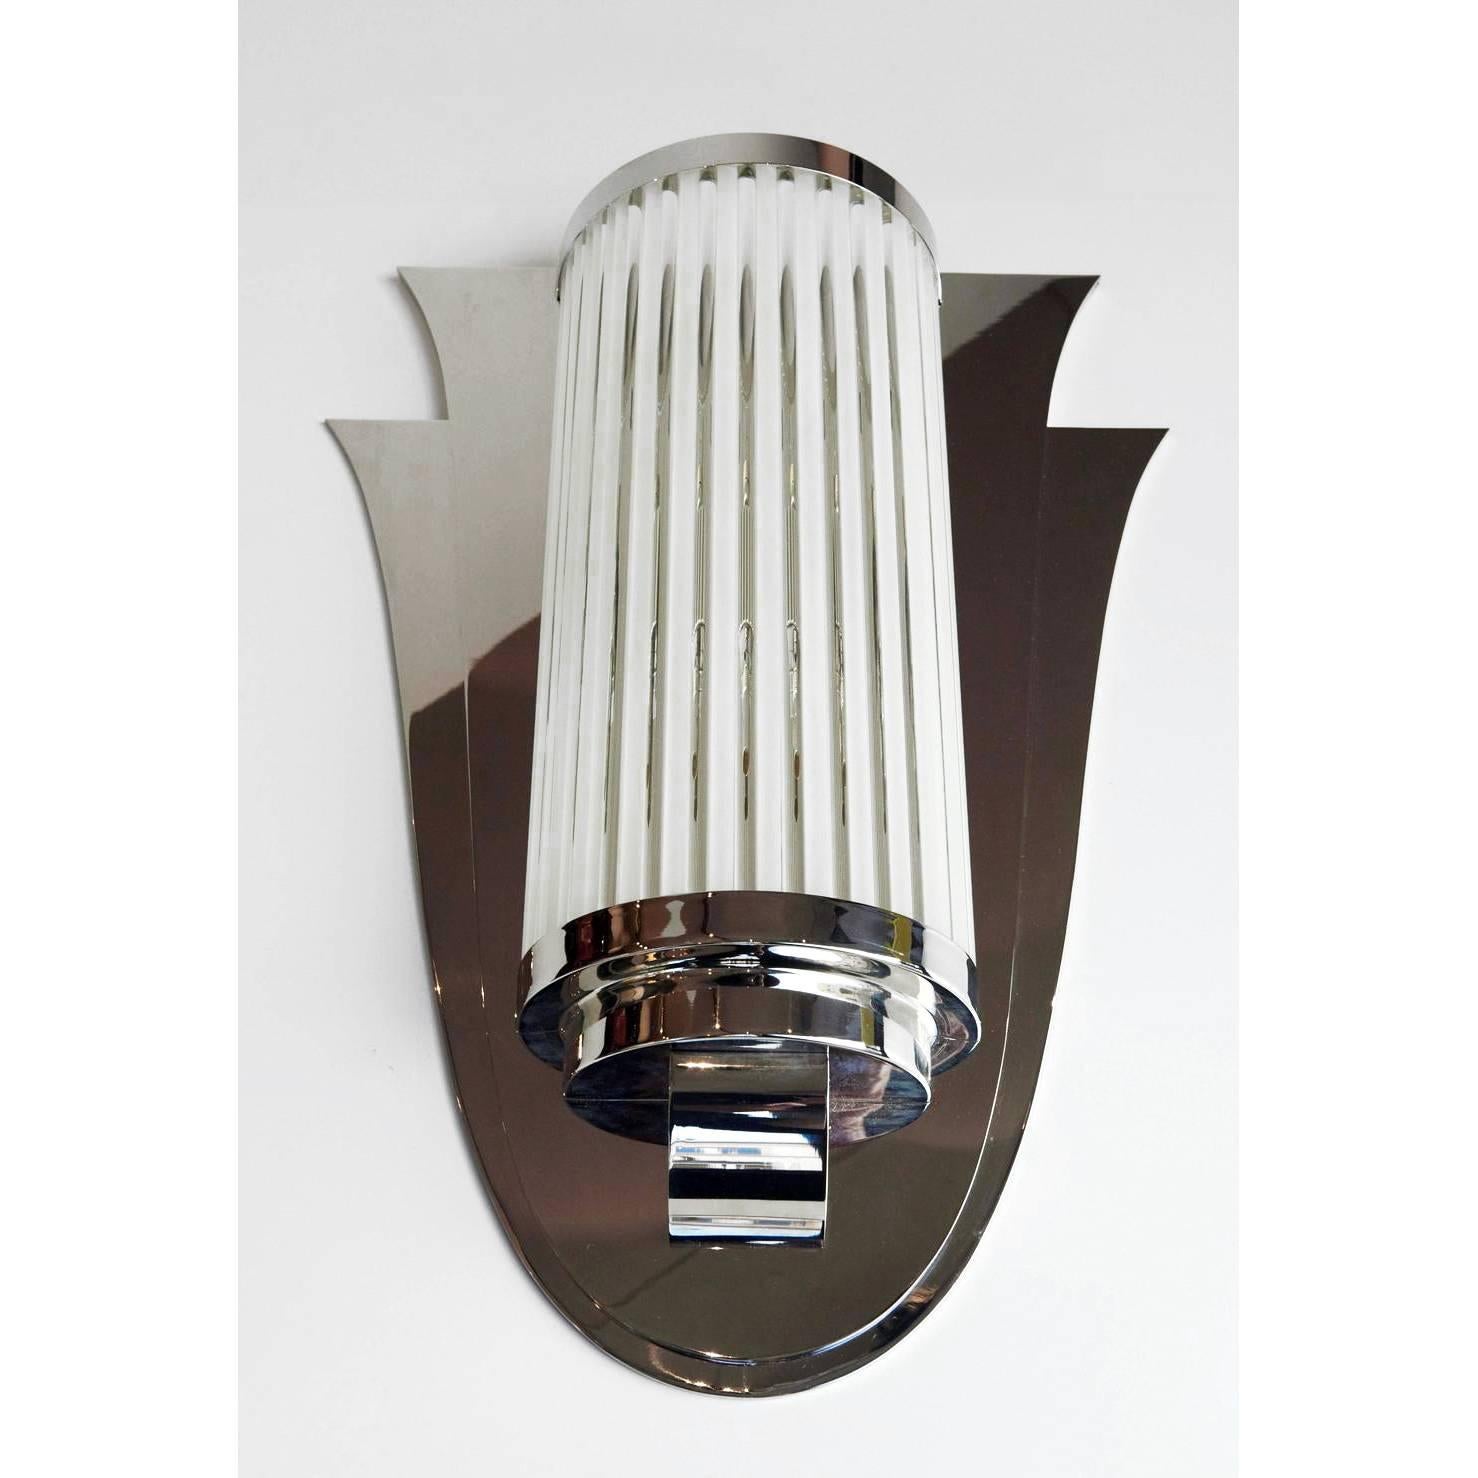 An exceptional pair of tulip shaped wall sconces lights, made in nickel-plated metal frame and glass rods. The lamps are designed in Art-deco style, a typical modernist design.

Made in France, 
circa 2000.